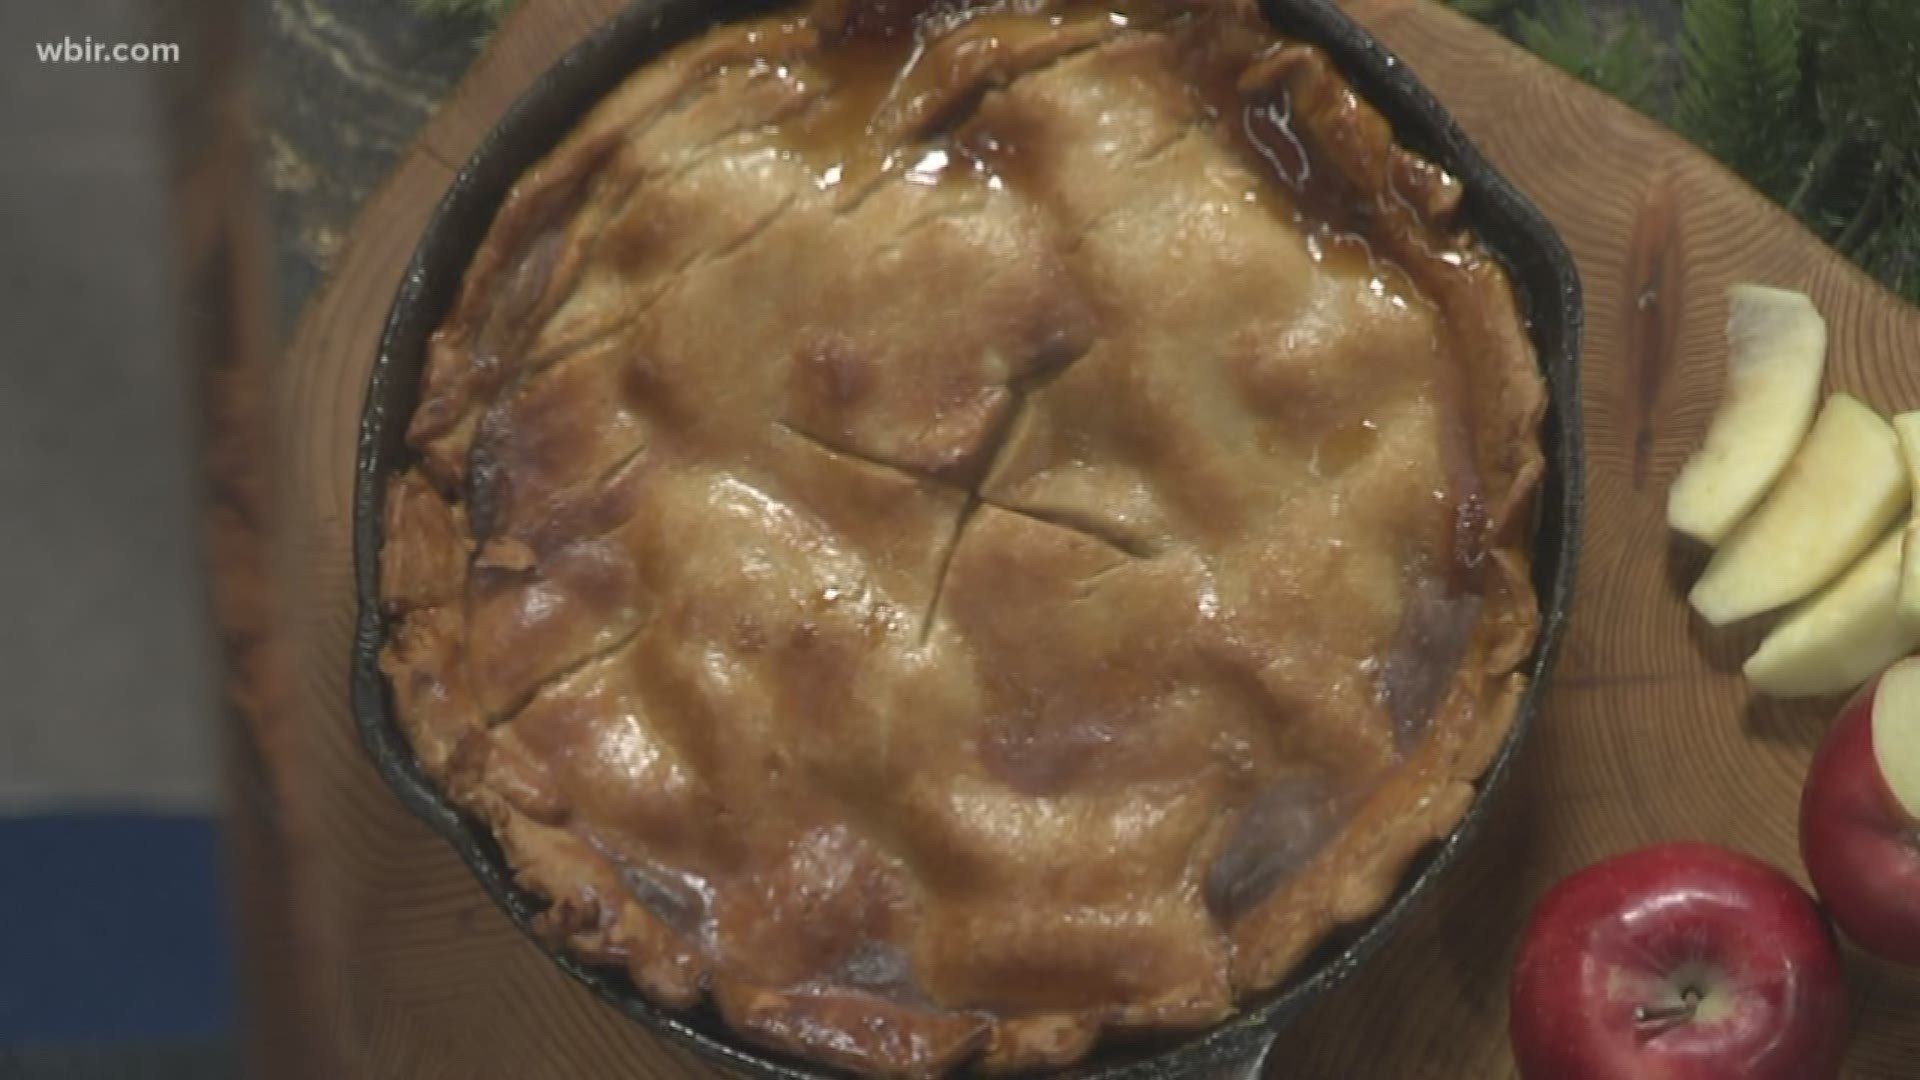 Melissa Graves from Donna's Old Town Cafe is here to show us how to make a skillet apple pie.